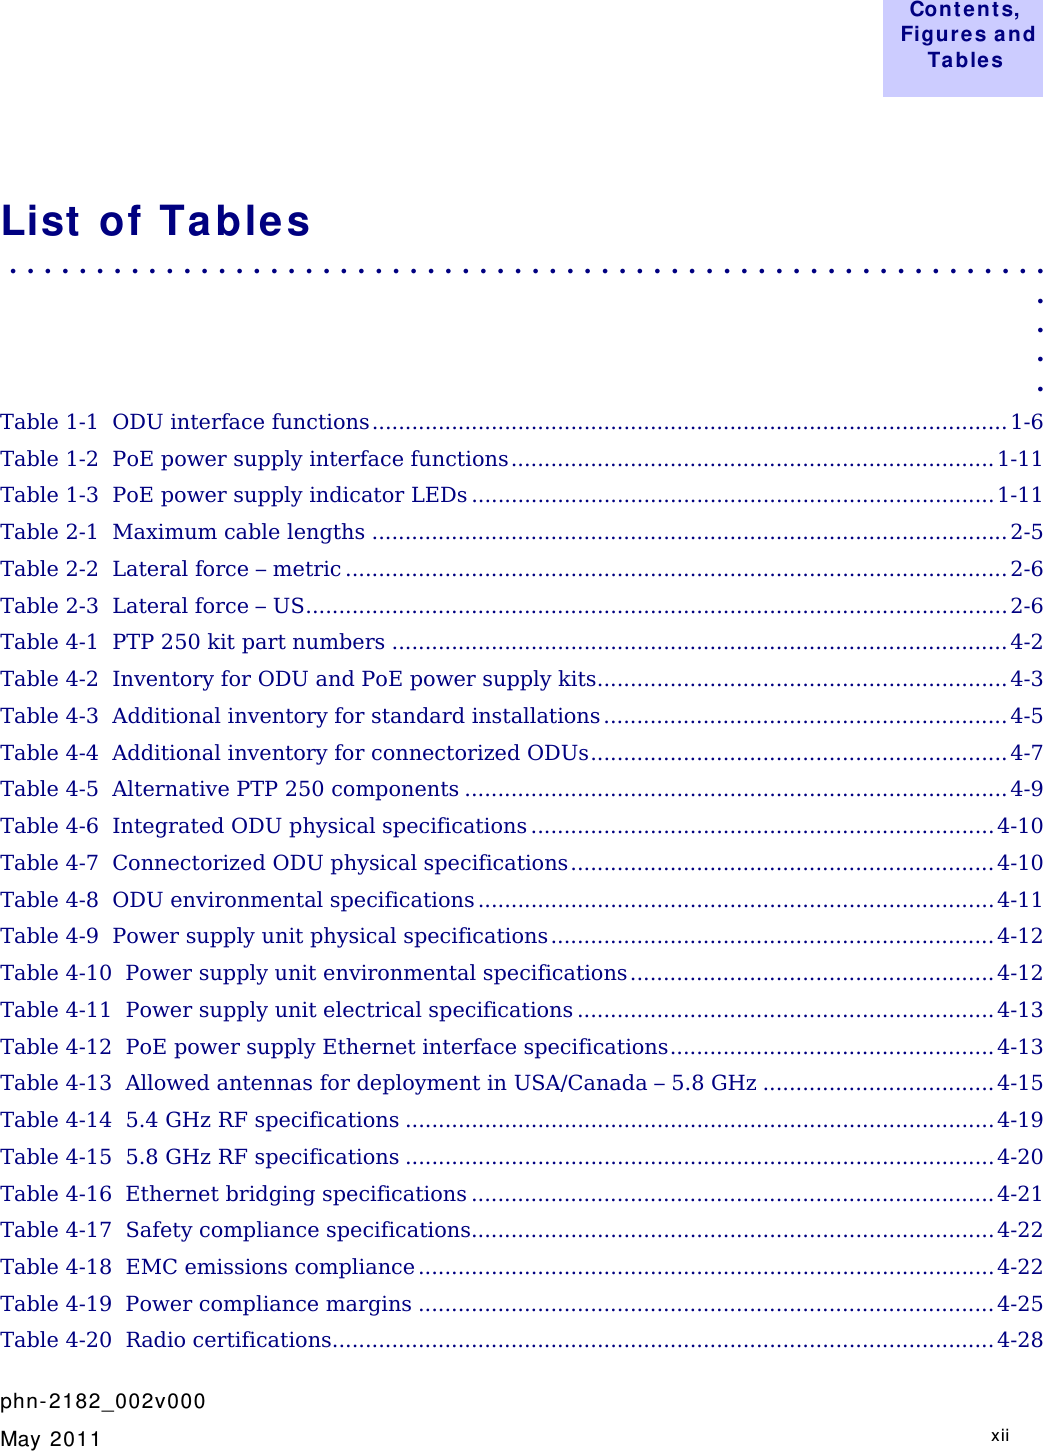  Cont ent s,  Figure s a nd Table s     phn- 2182_002v000   May 2011   xii  List  of Tables . . . . . . . . . . . . . . . . . . . . . . . . . . . . . . . . . . . . . . . . . . . . . . . . . . . . . . . . . . . .  . . . . Table 1-1  ODU interface functions ................................................................................................ 1-6Table 1-2  PoE power supply interface functions ......................................................................... 1-11Table 1-3  PoE power supply indicator LEDs ............................................................................... 1-11Table 2-1  Maximum cable lengths ................................................................................................ 2-5Table 2-2  Lateral force – metric .................................................................................................... 2-6Table 2-3  Lateral force – US .......................................................................................................... 2-6Table 4-1  PTP 250 kit part numbers ............................................................................................. 4-2Table 4-2  Inventory for ODU and PoE power supply kits .............................................................. 4-3Table 4-3  Additional inventory for standard installations ............................................................. 4-5Table 4-4  Additional inventory for connectorized ODUs ............................................................... 4-7Table 4-5  Alternative PTP 250 components .................................................................................. 4-9Table 4-6  Integrated ODU physical specifications ...................................................................... 4-10Table 4-7  Connectorized ODU physical specifications ................................................................ 4-10Table 4-8  ODU environmental specifications .............................................................................. 4-11Table 4-9  Power supply unit physical specifications ................................................................... 4-12Table 4-10  Power supply unit environmental specifications ....................................................... 4-12Table 4-11  Power supply unit electrical specifications ............................................................... 4-13Table 4-12  PoE power supply Ethernet interface specifications ................................................. 4-13Table 4-13  Allowed antennas for deployment in USA/Canada – 5.8 GHz ................................... 4-15Table 4-14  5.4 GHz RF specifications ......................................................................................... 4-19Table 4-15  5.8 GHz RF specifications ......................................................................................... 4-20Table 4-16  Ethernet bridging specifications ............................................................................... 4-21Table 4-17  Safety compliance specifications............................................................................... 4-22Table 4-18  EMC emissions compliance ....................................................................................... 4-22Table 4-19  Power compliance margins ....................................................................................... 4-25Table 4-20  Radio certifications.................................................................................................... 4-28